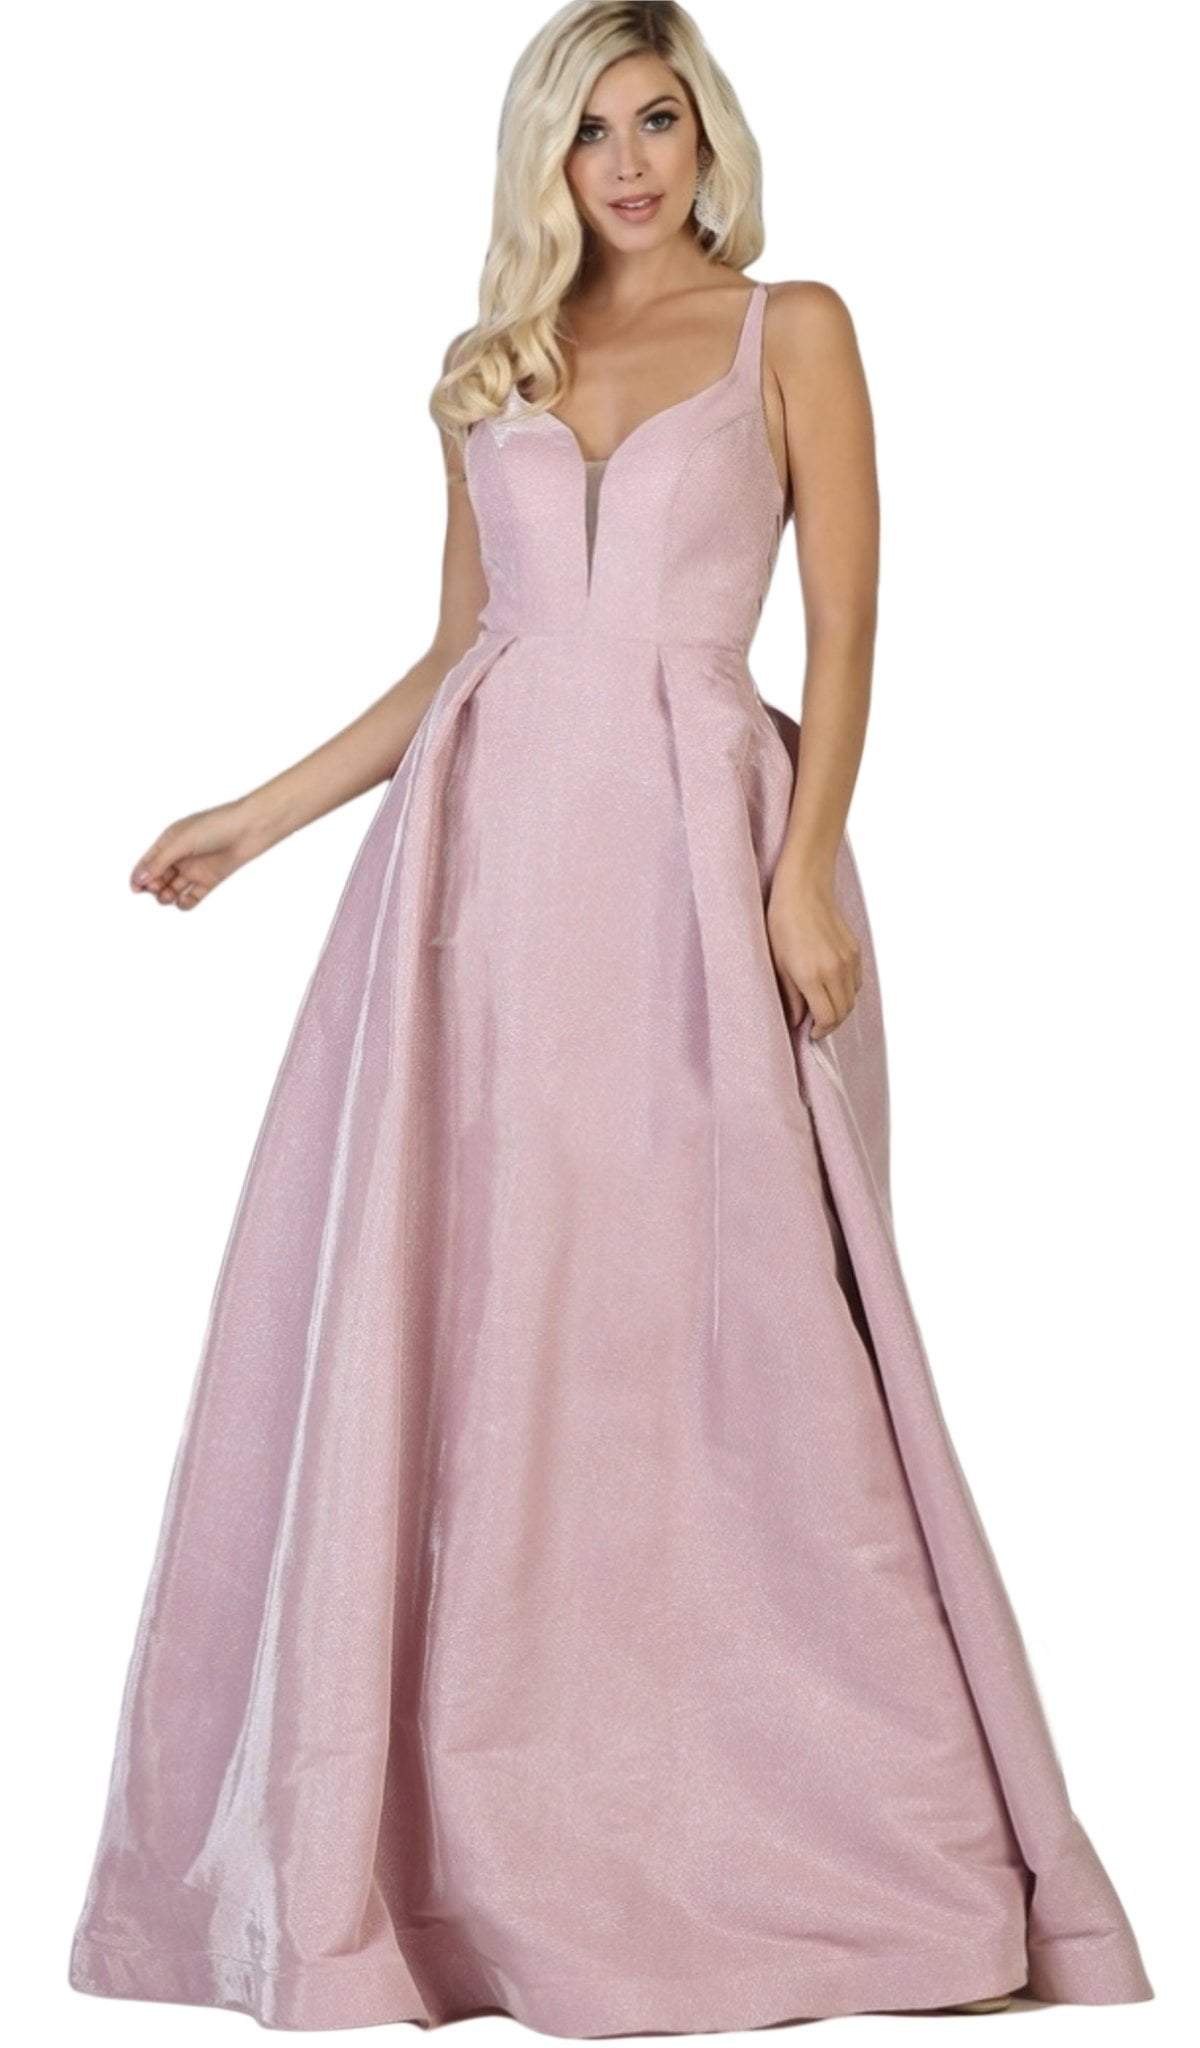 May Queen - RQ7759 Plunging Sweetheart Metallic A-Line Gown Special Occasion Dress 2 / Pink